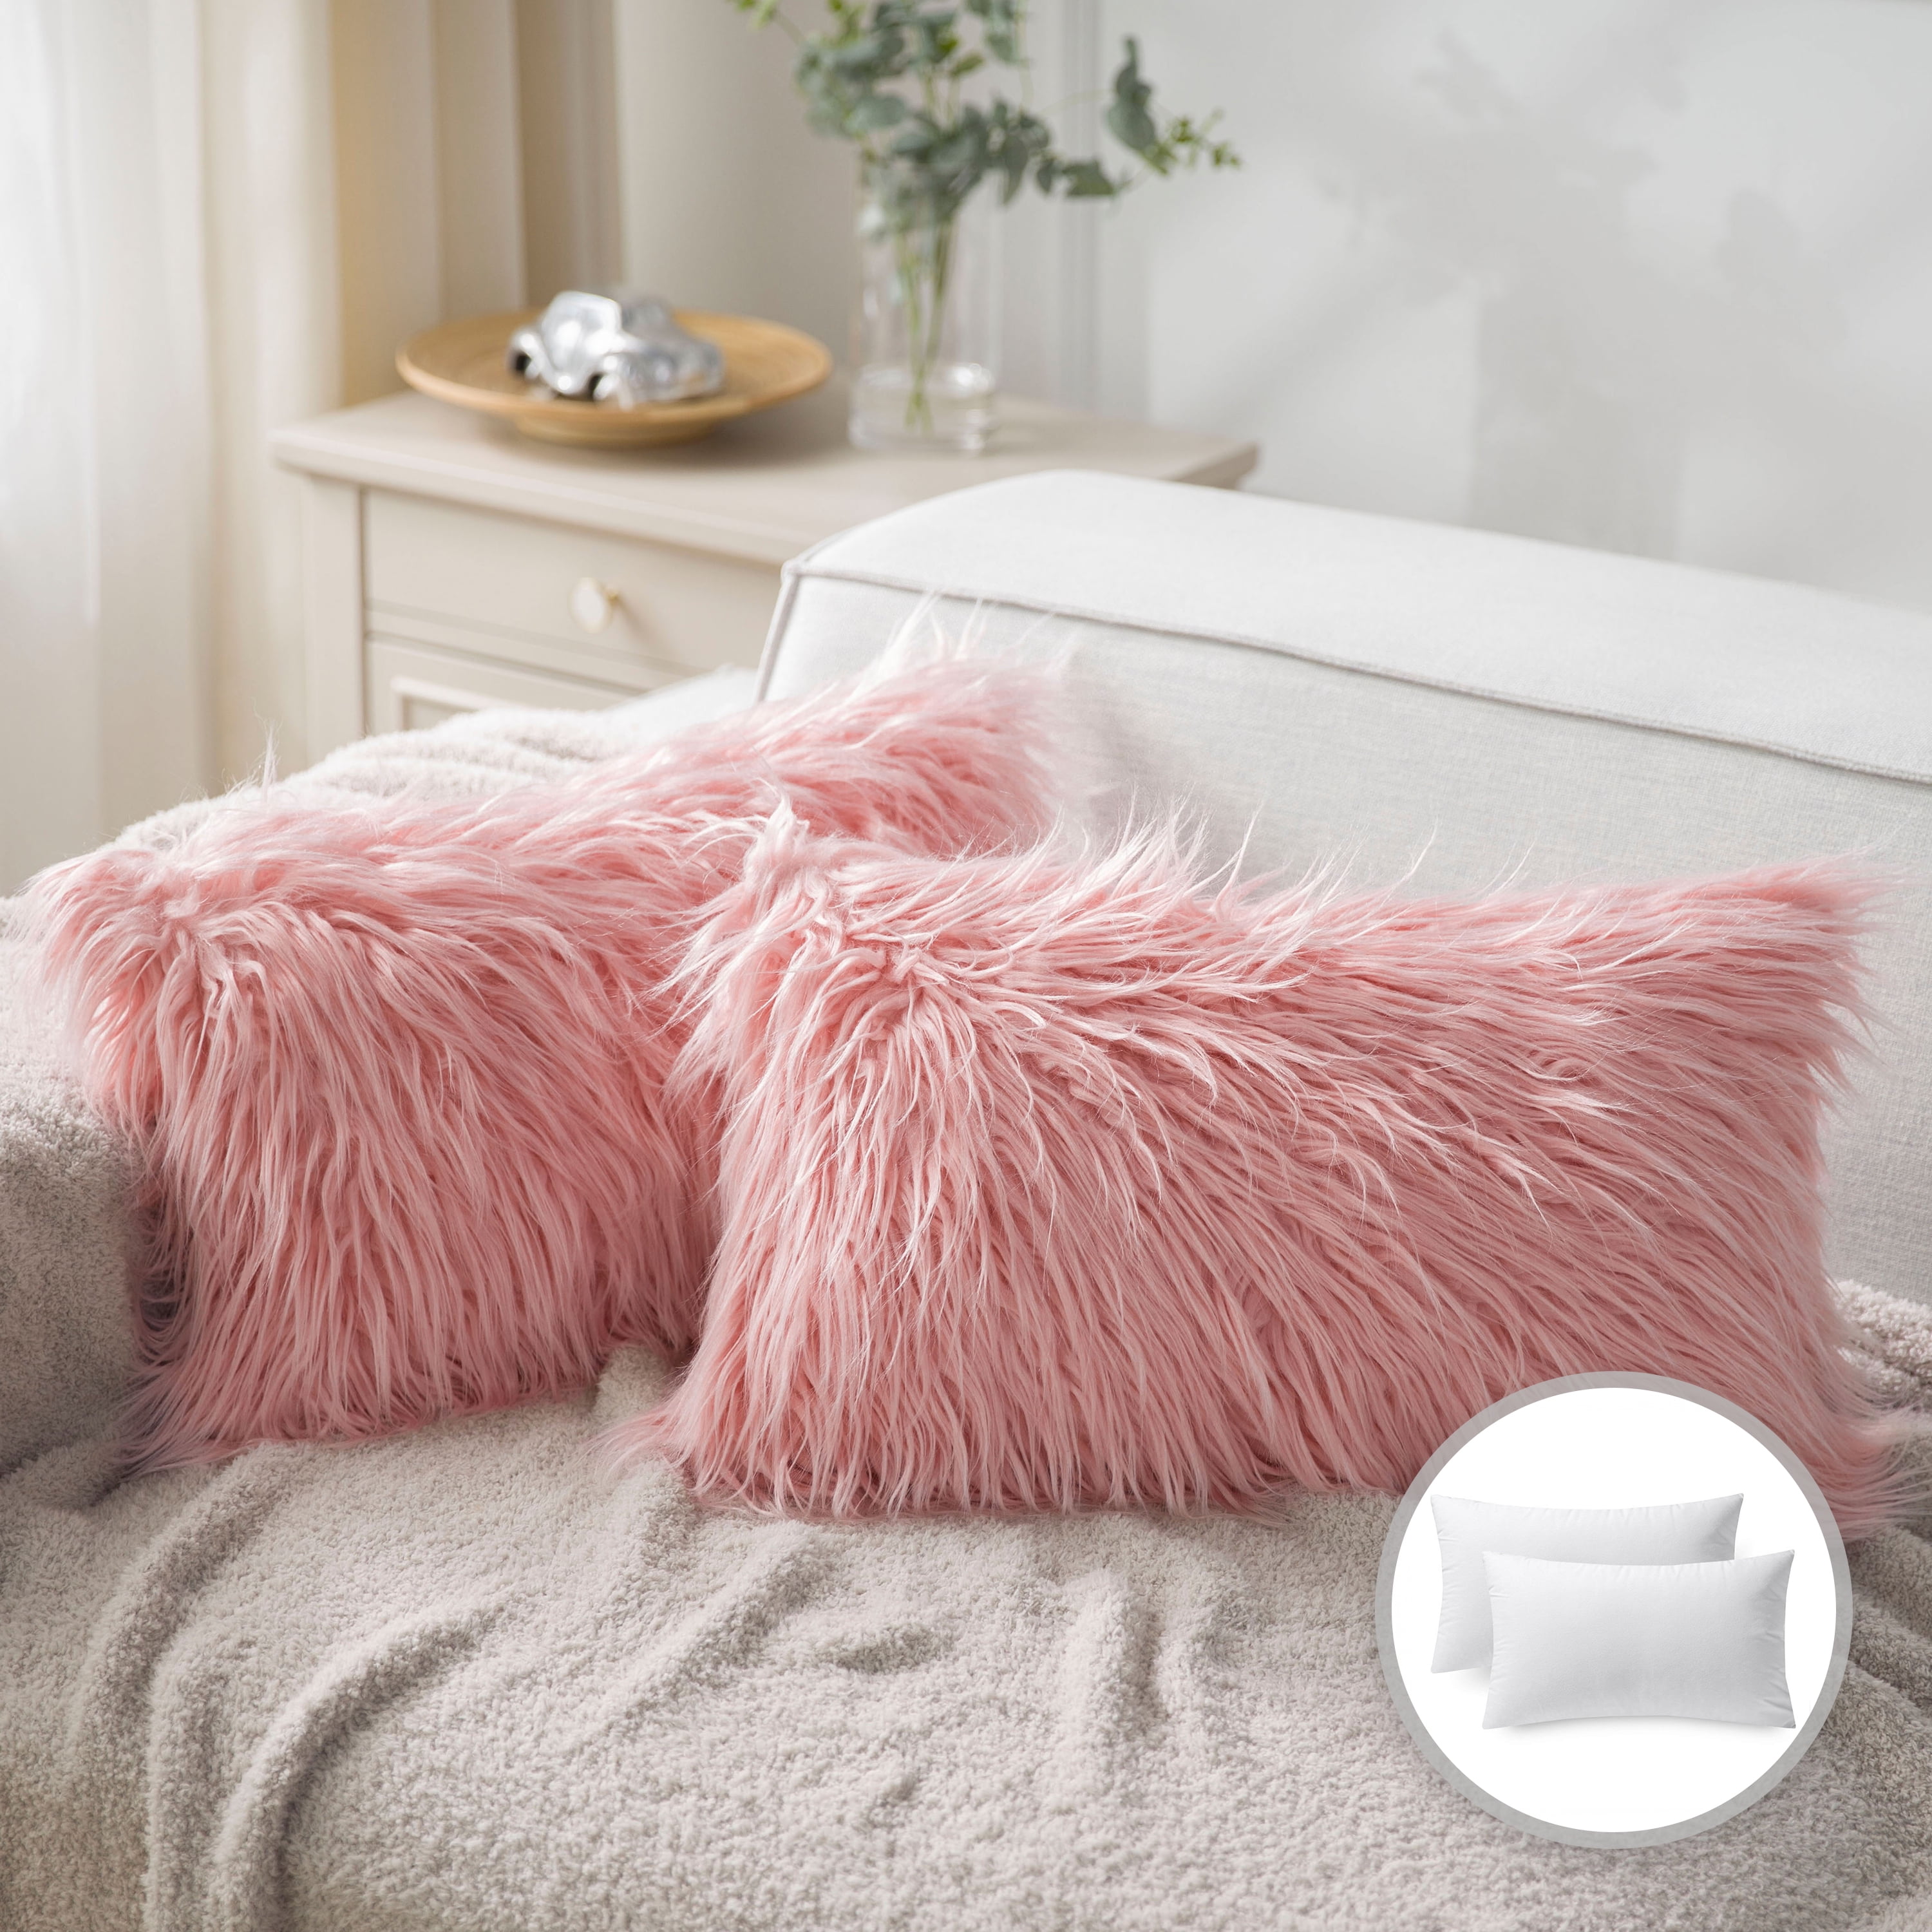 Phantoscope Faux Fur Solid Decorative Pillow Cover Fluffy Throw Pillow  Mongolian Luxury Fuzzy Pillow Case Cushion Cover for Bedroom and Couch,True